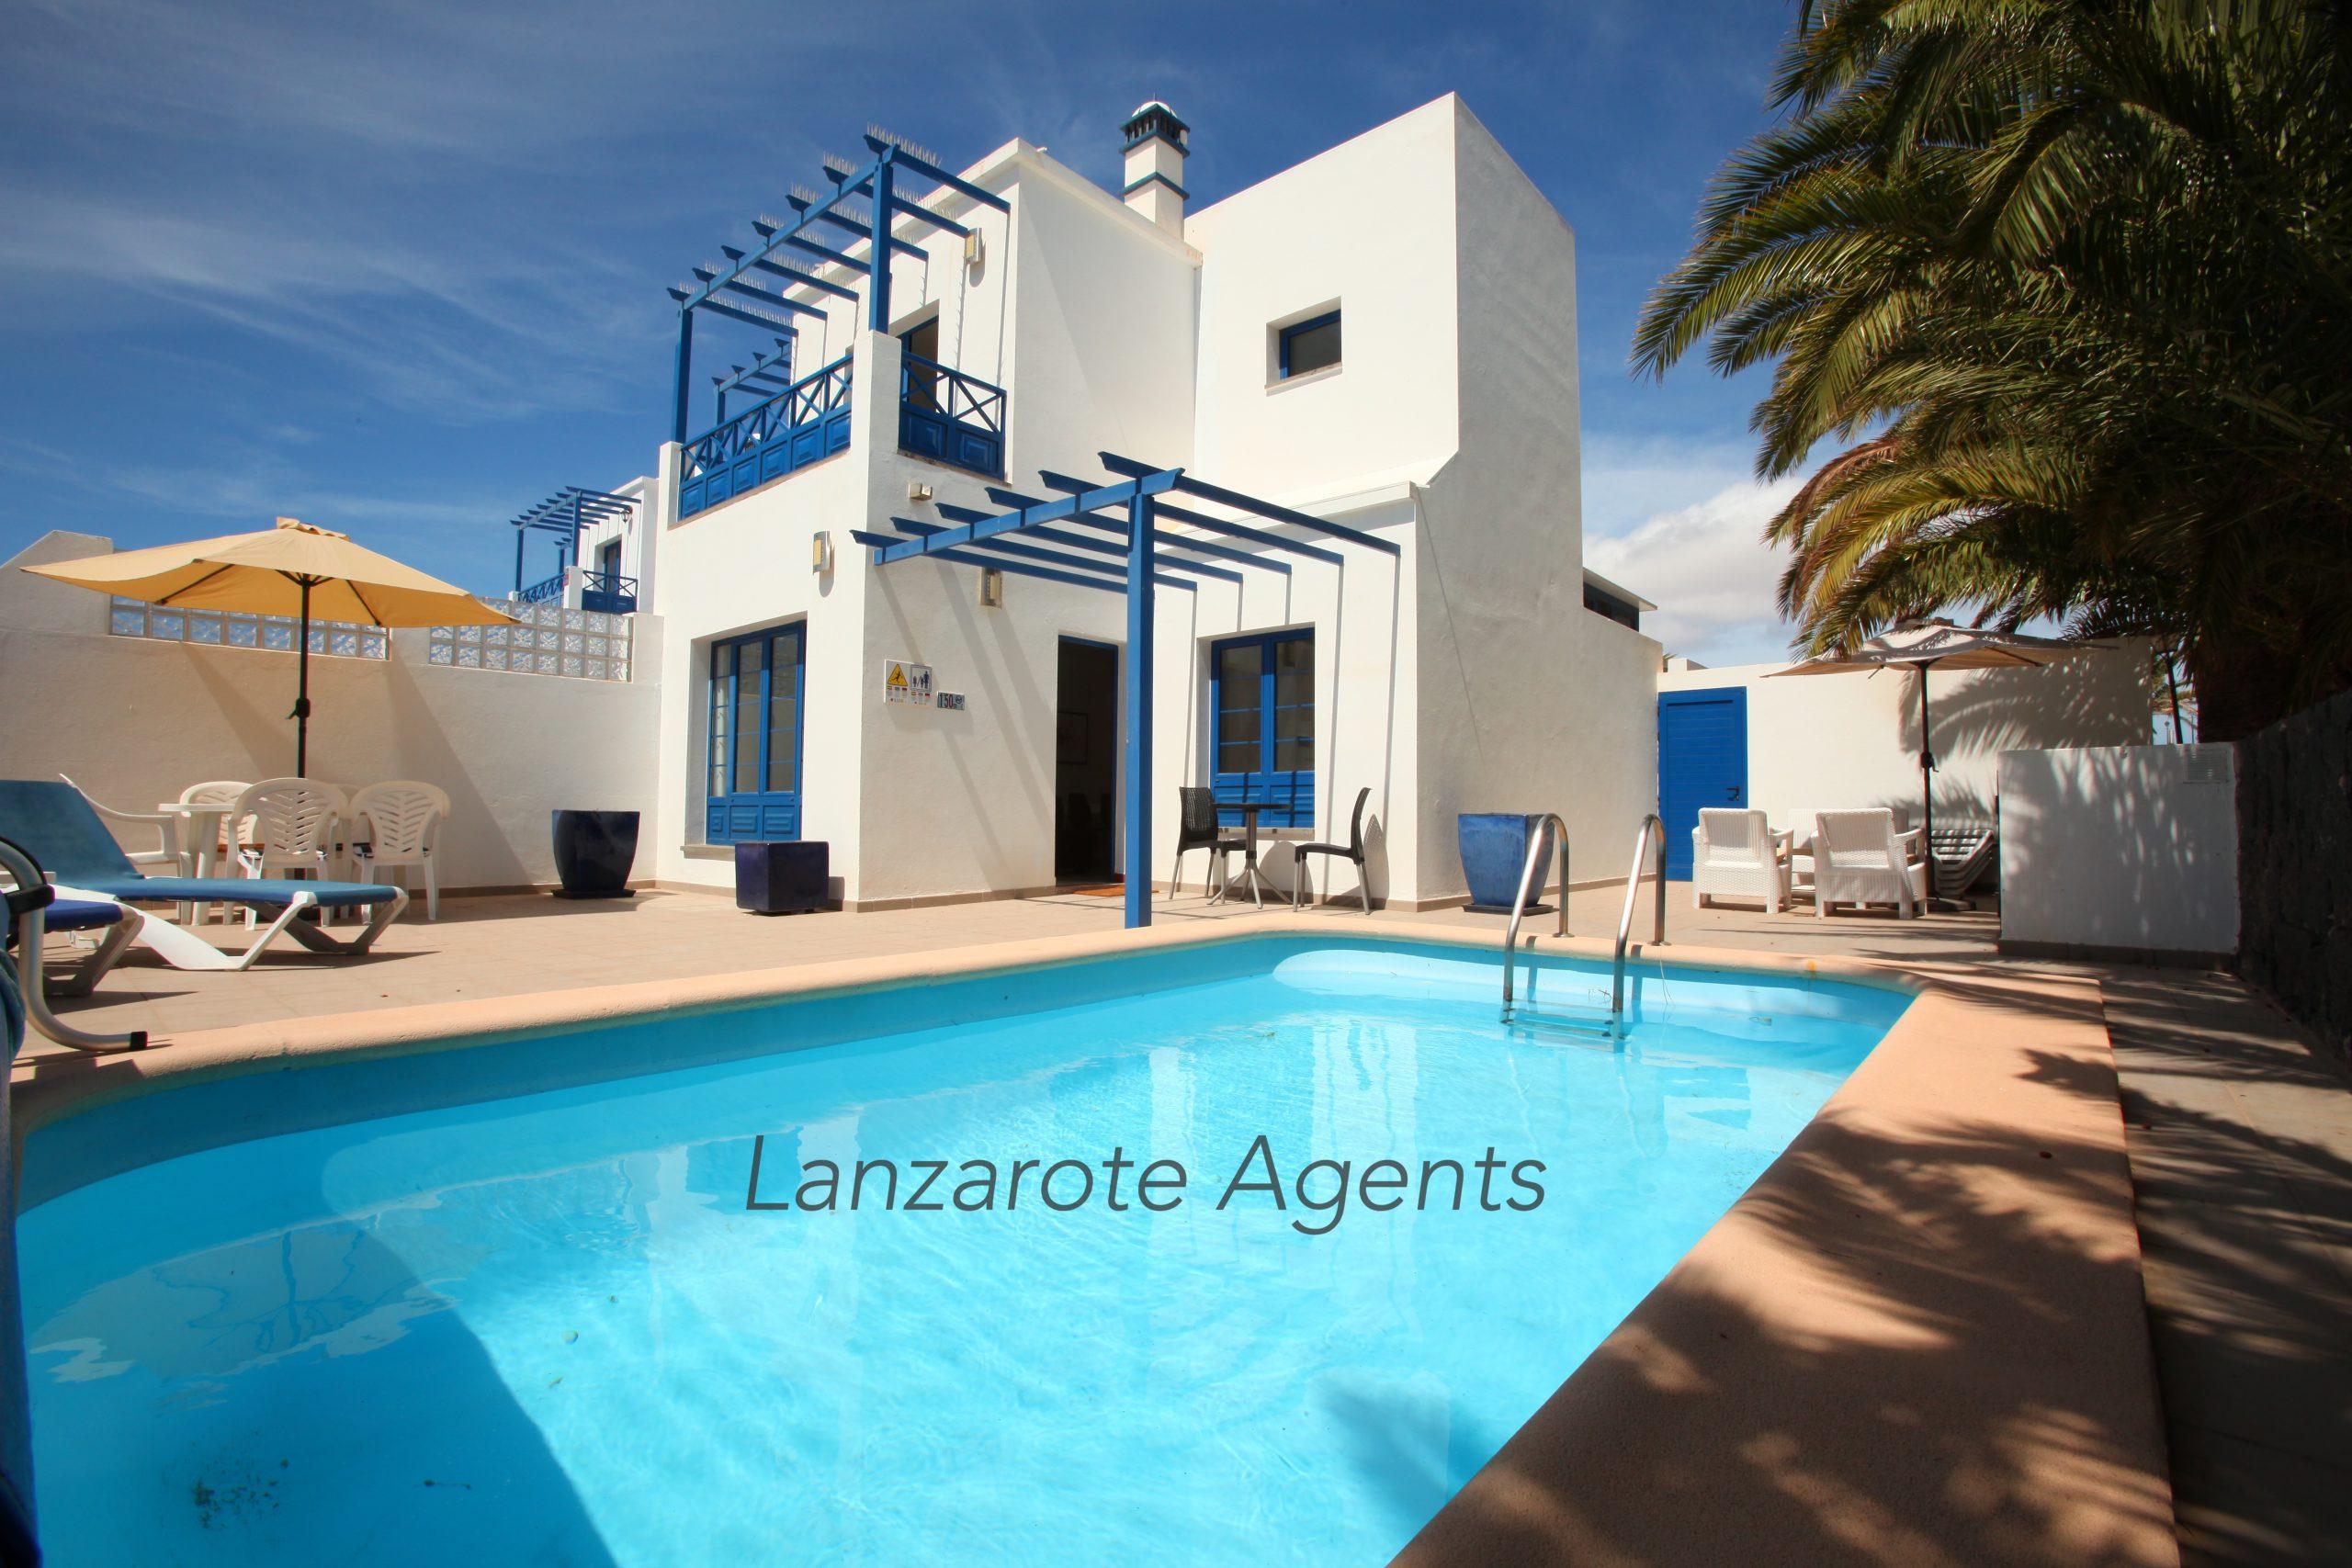 Perfectly Located 3 Bedroom Villa  in Playa Blanca with Stunning Sea Views, Private Pool at Only 1 min Walk from the Sea